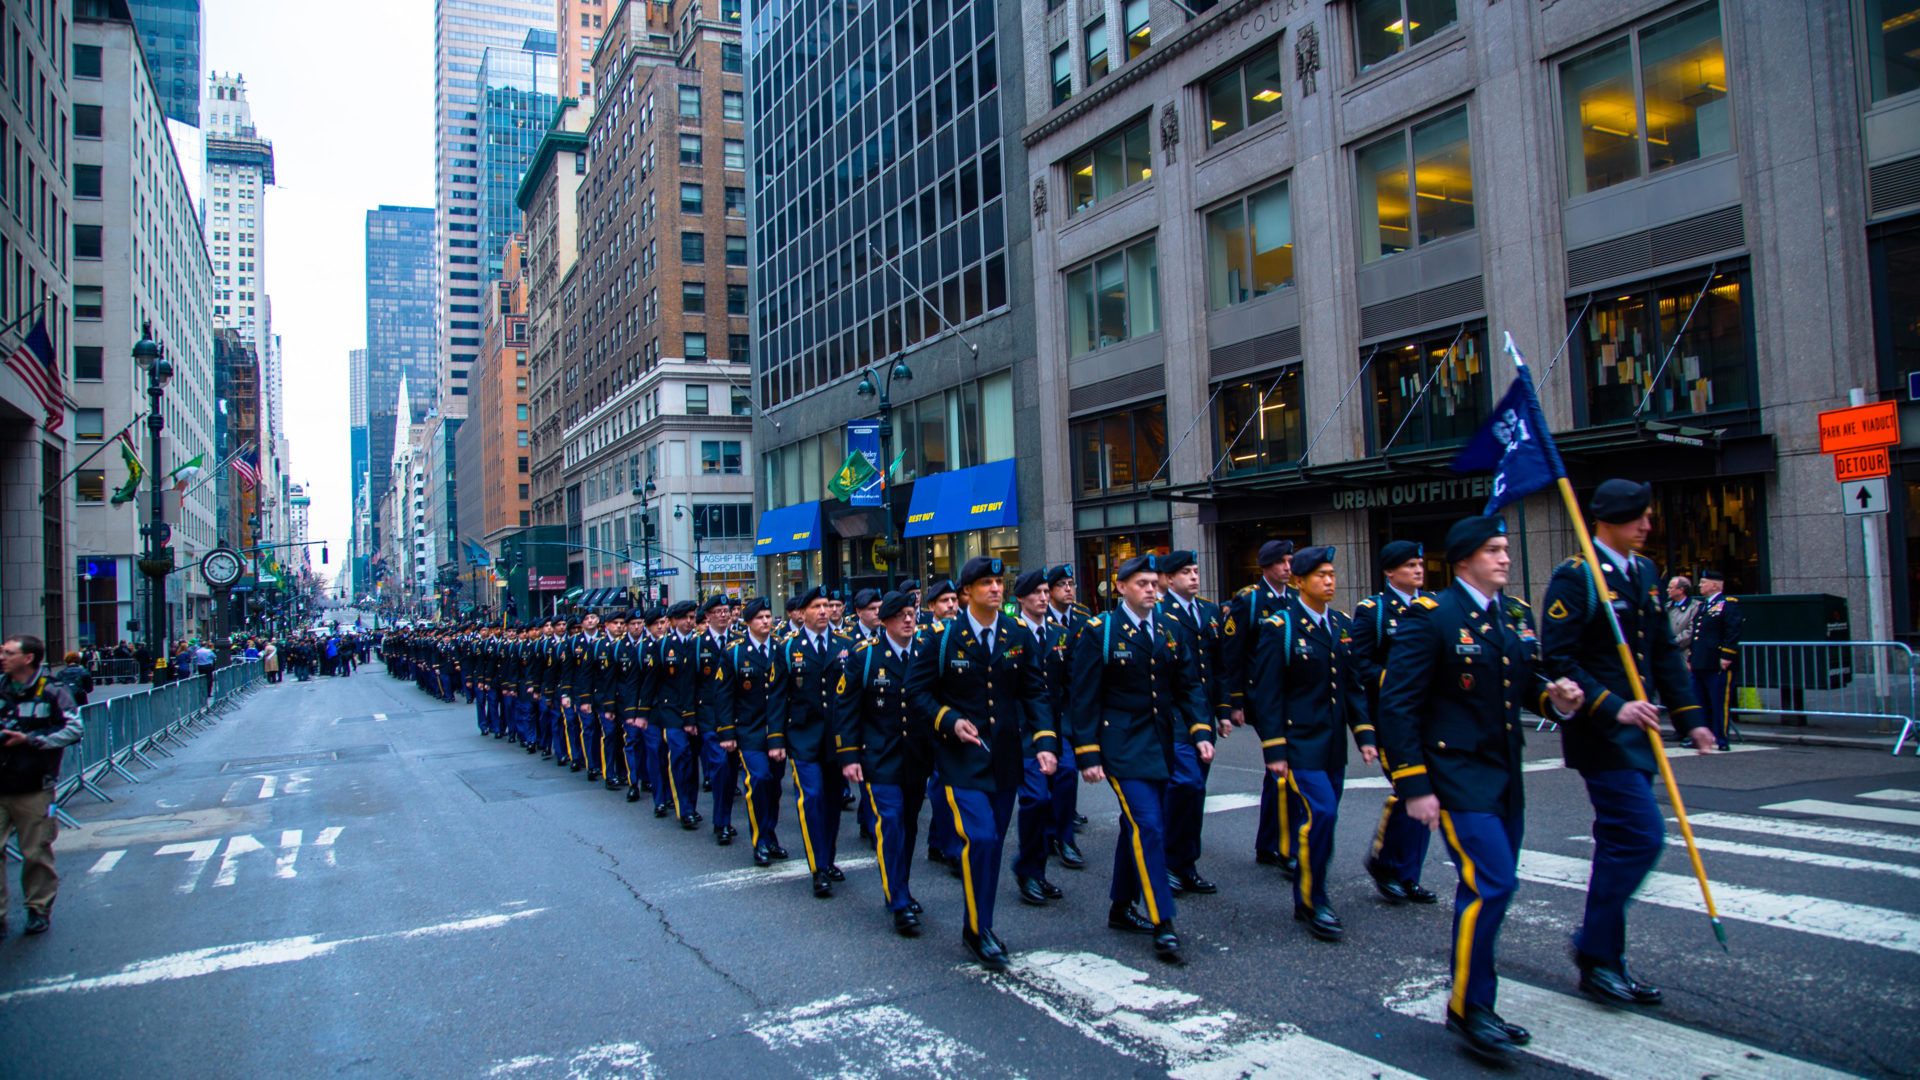 St Patrick's Day Parade in New York City,